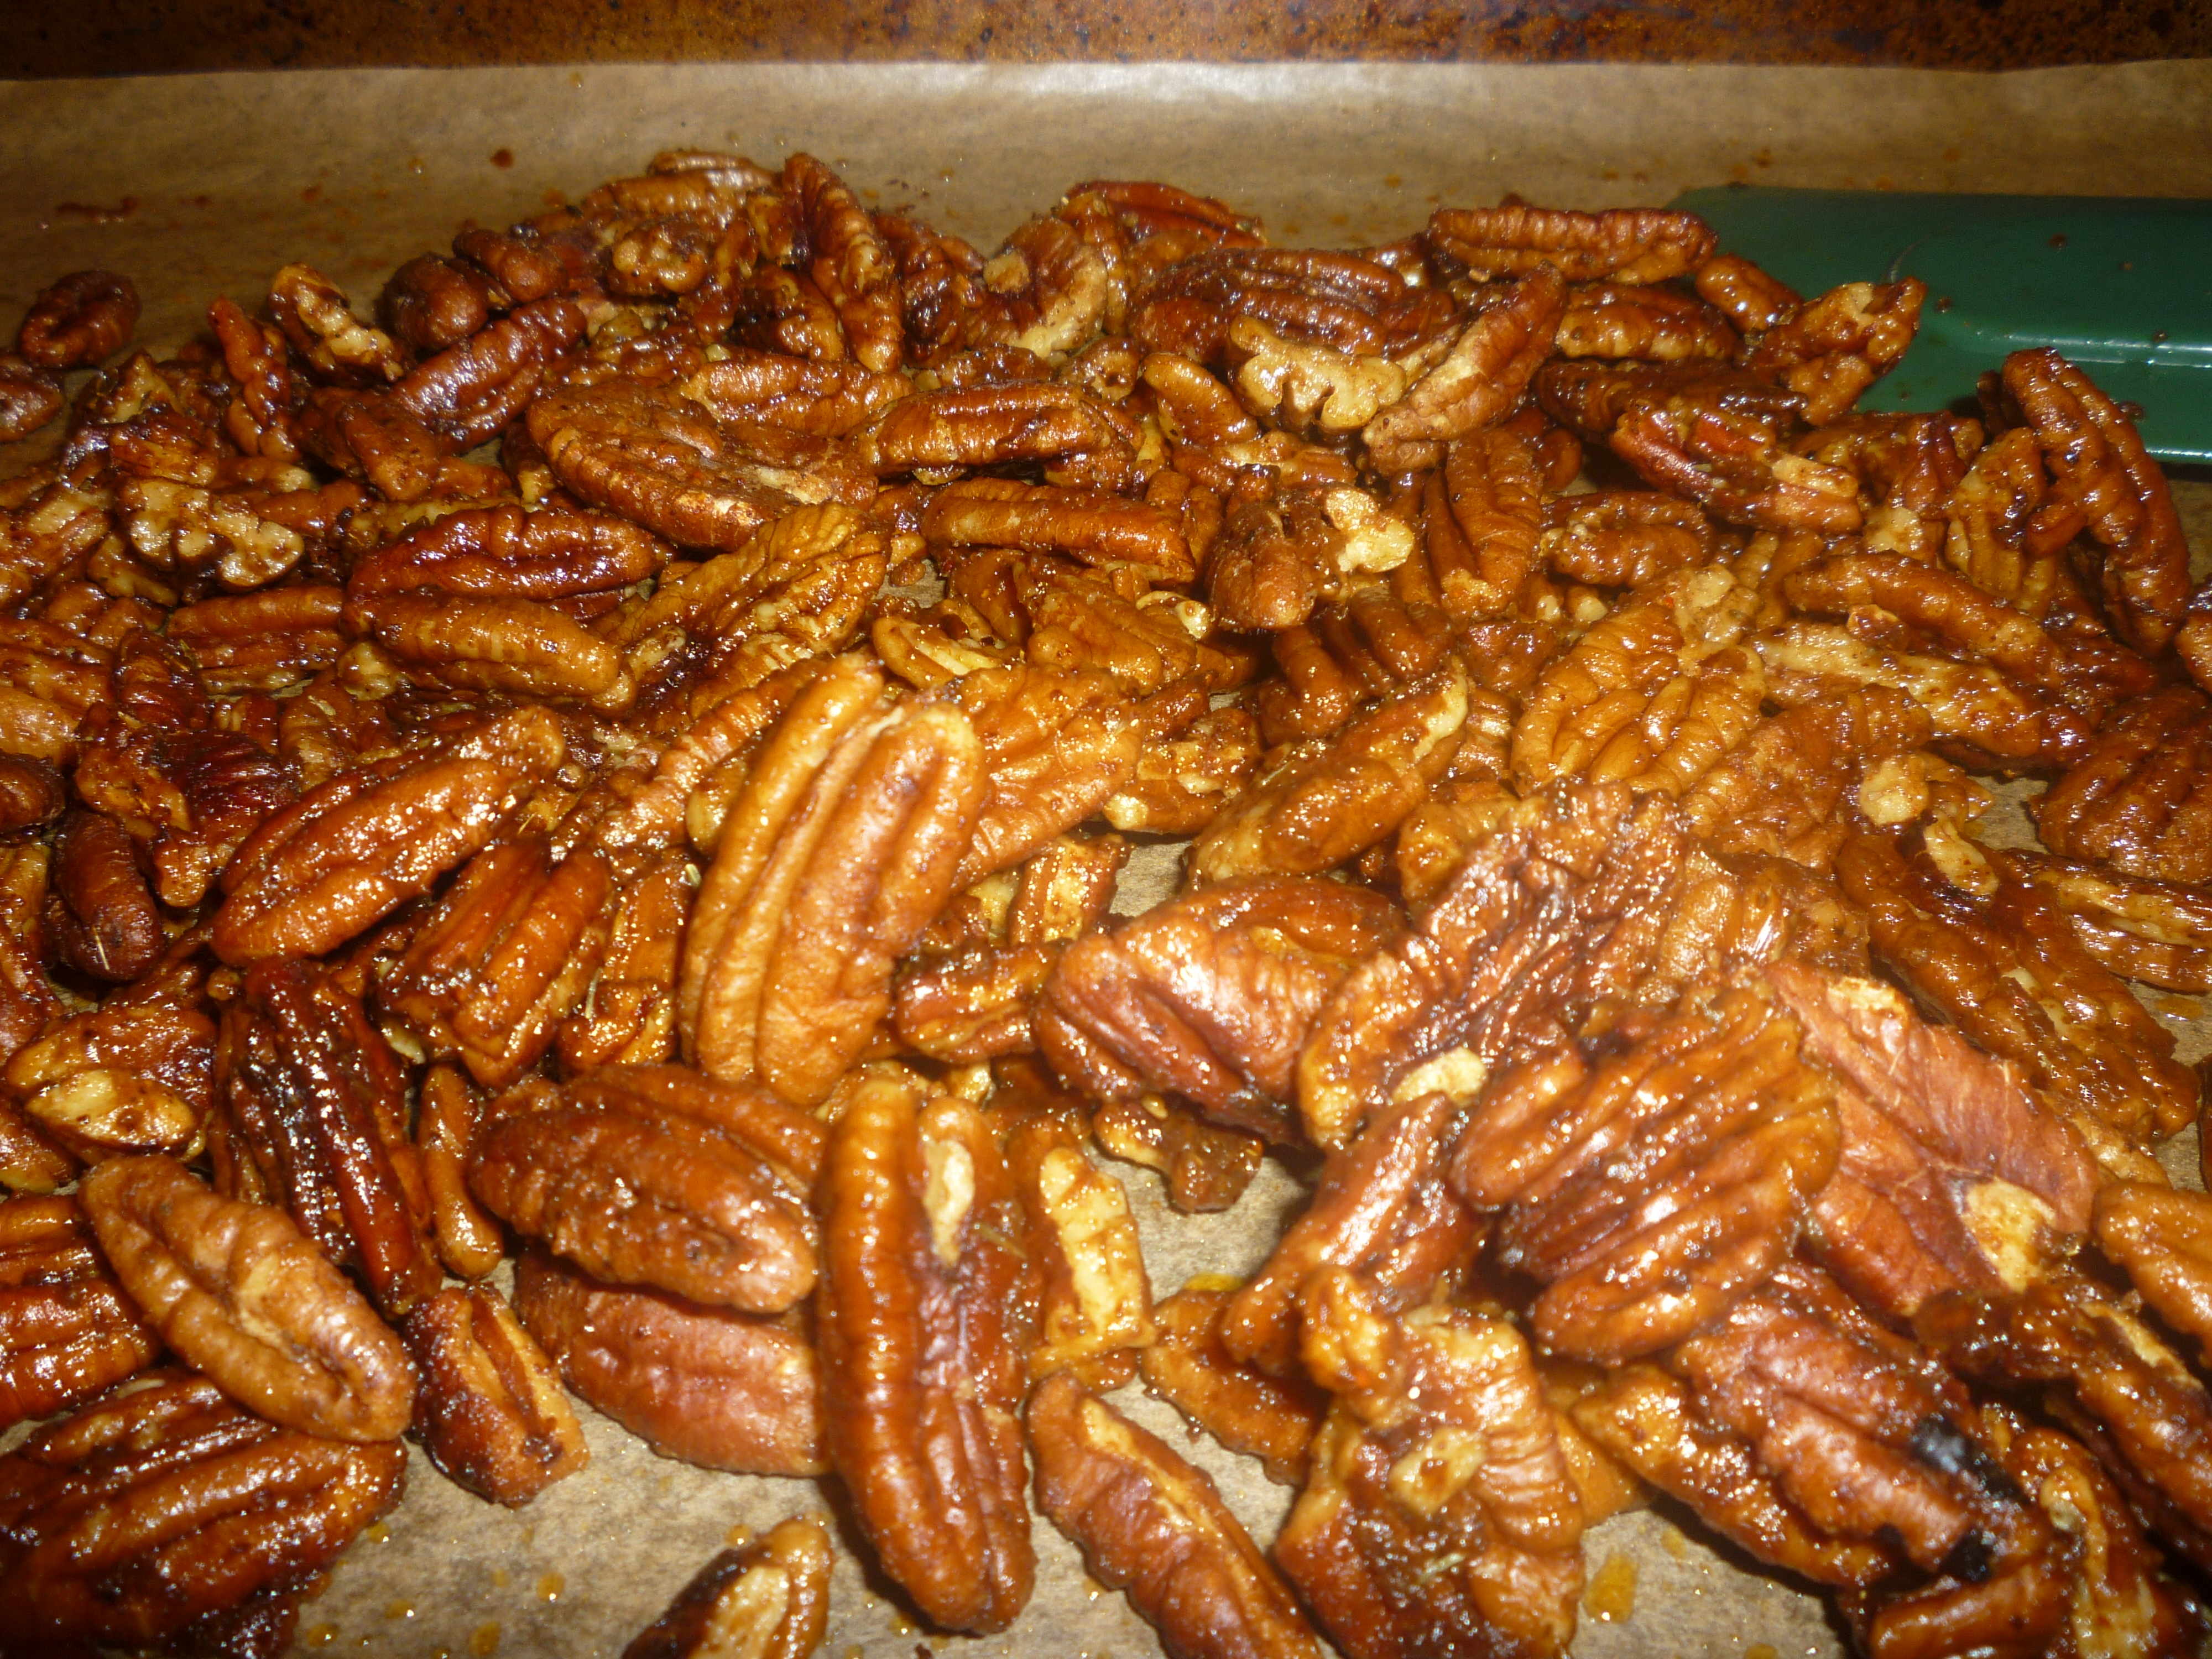 Homemade Edible Gifts - Spiced Pecans 